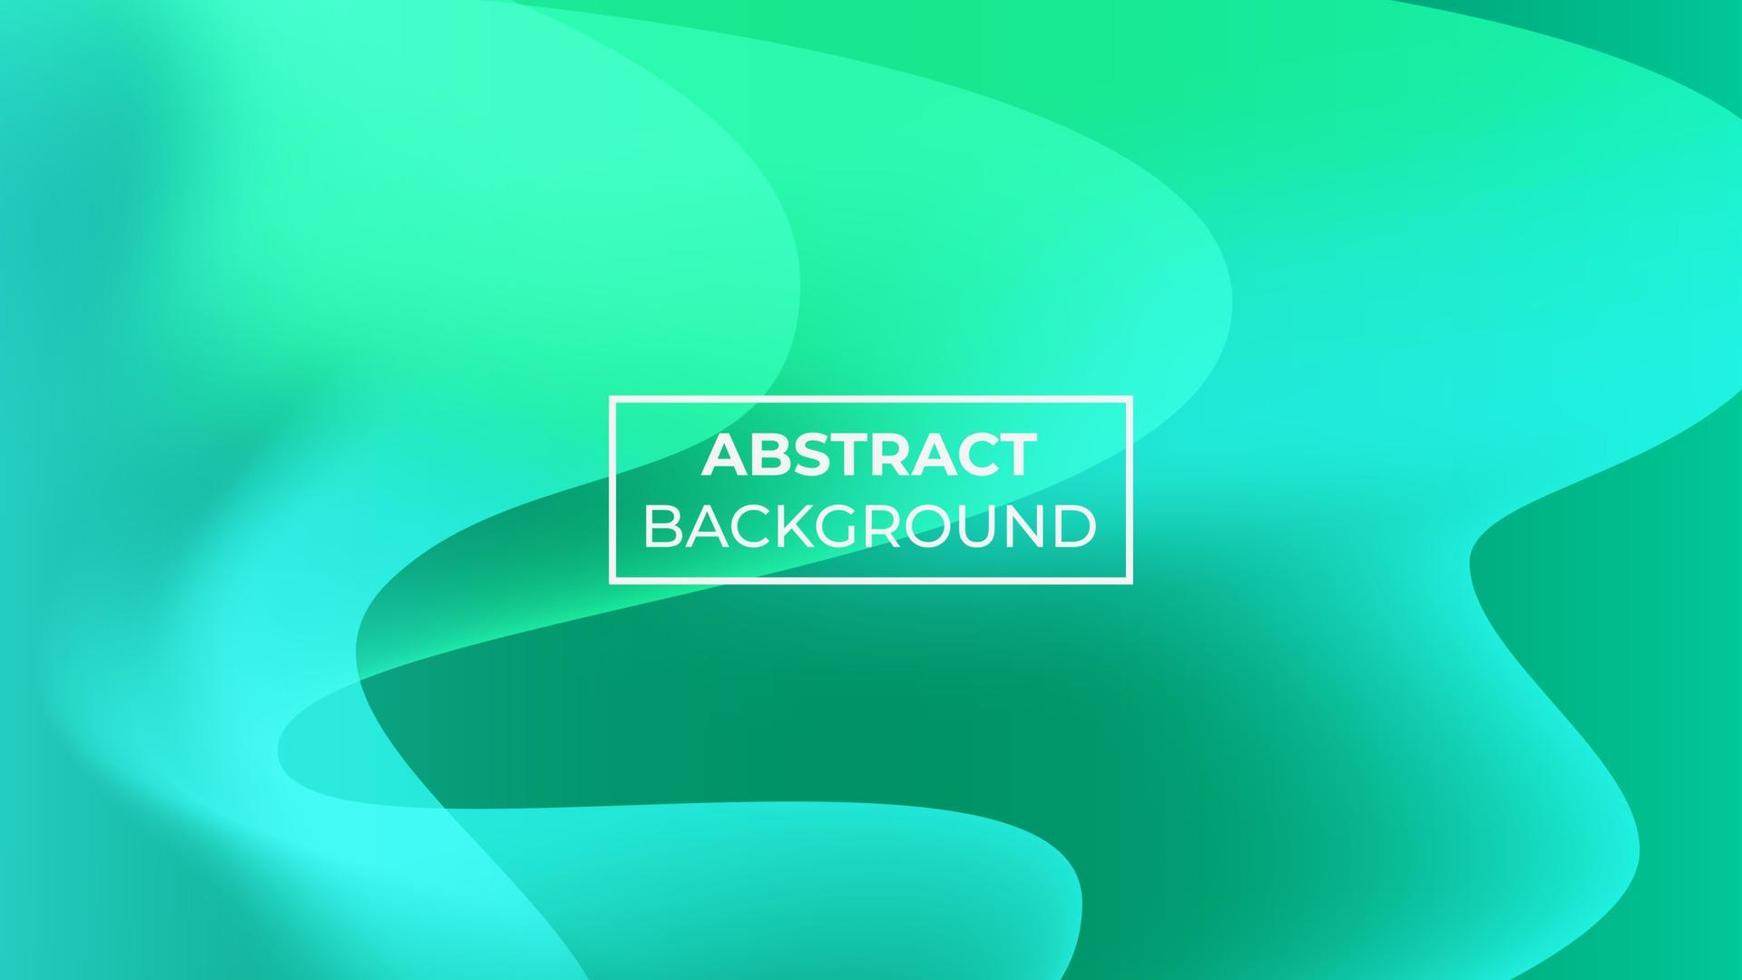 Abstract background with three wave model with green gradient , easy to edit vector